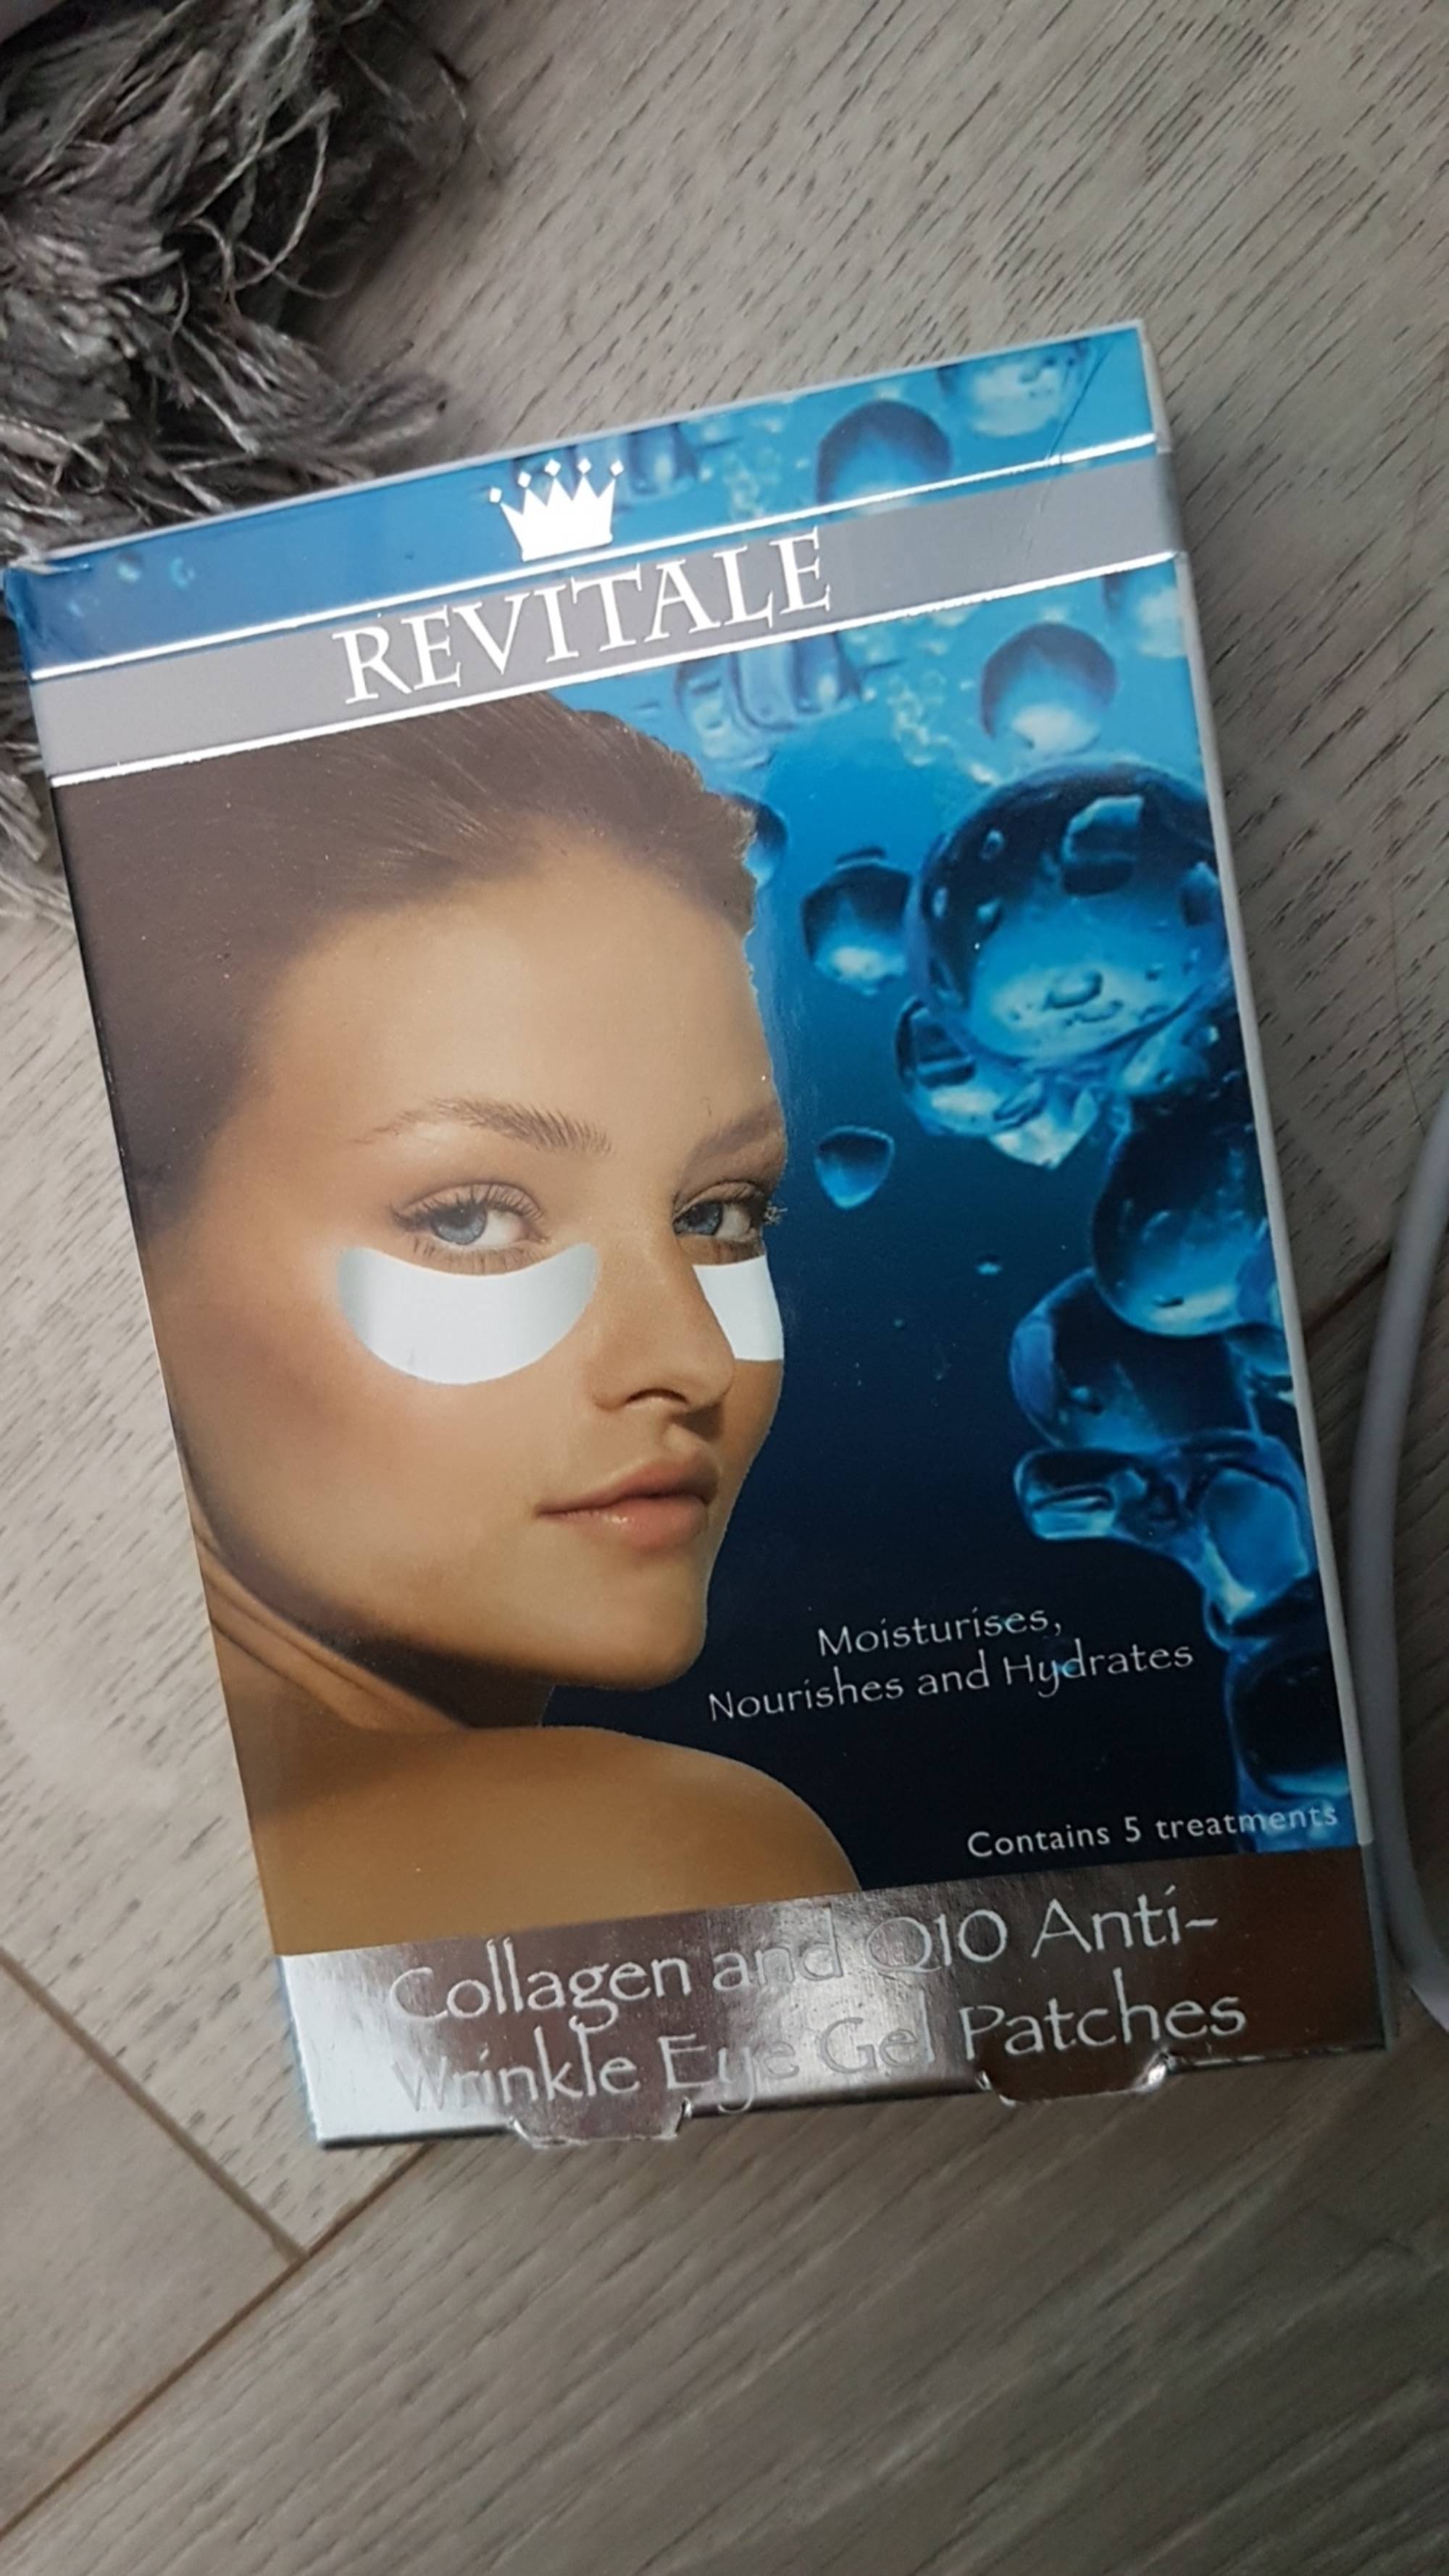 REVITALE - Collagen and Q10 anti-wrinkle eye gel patches